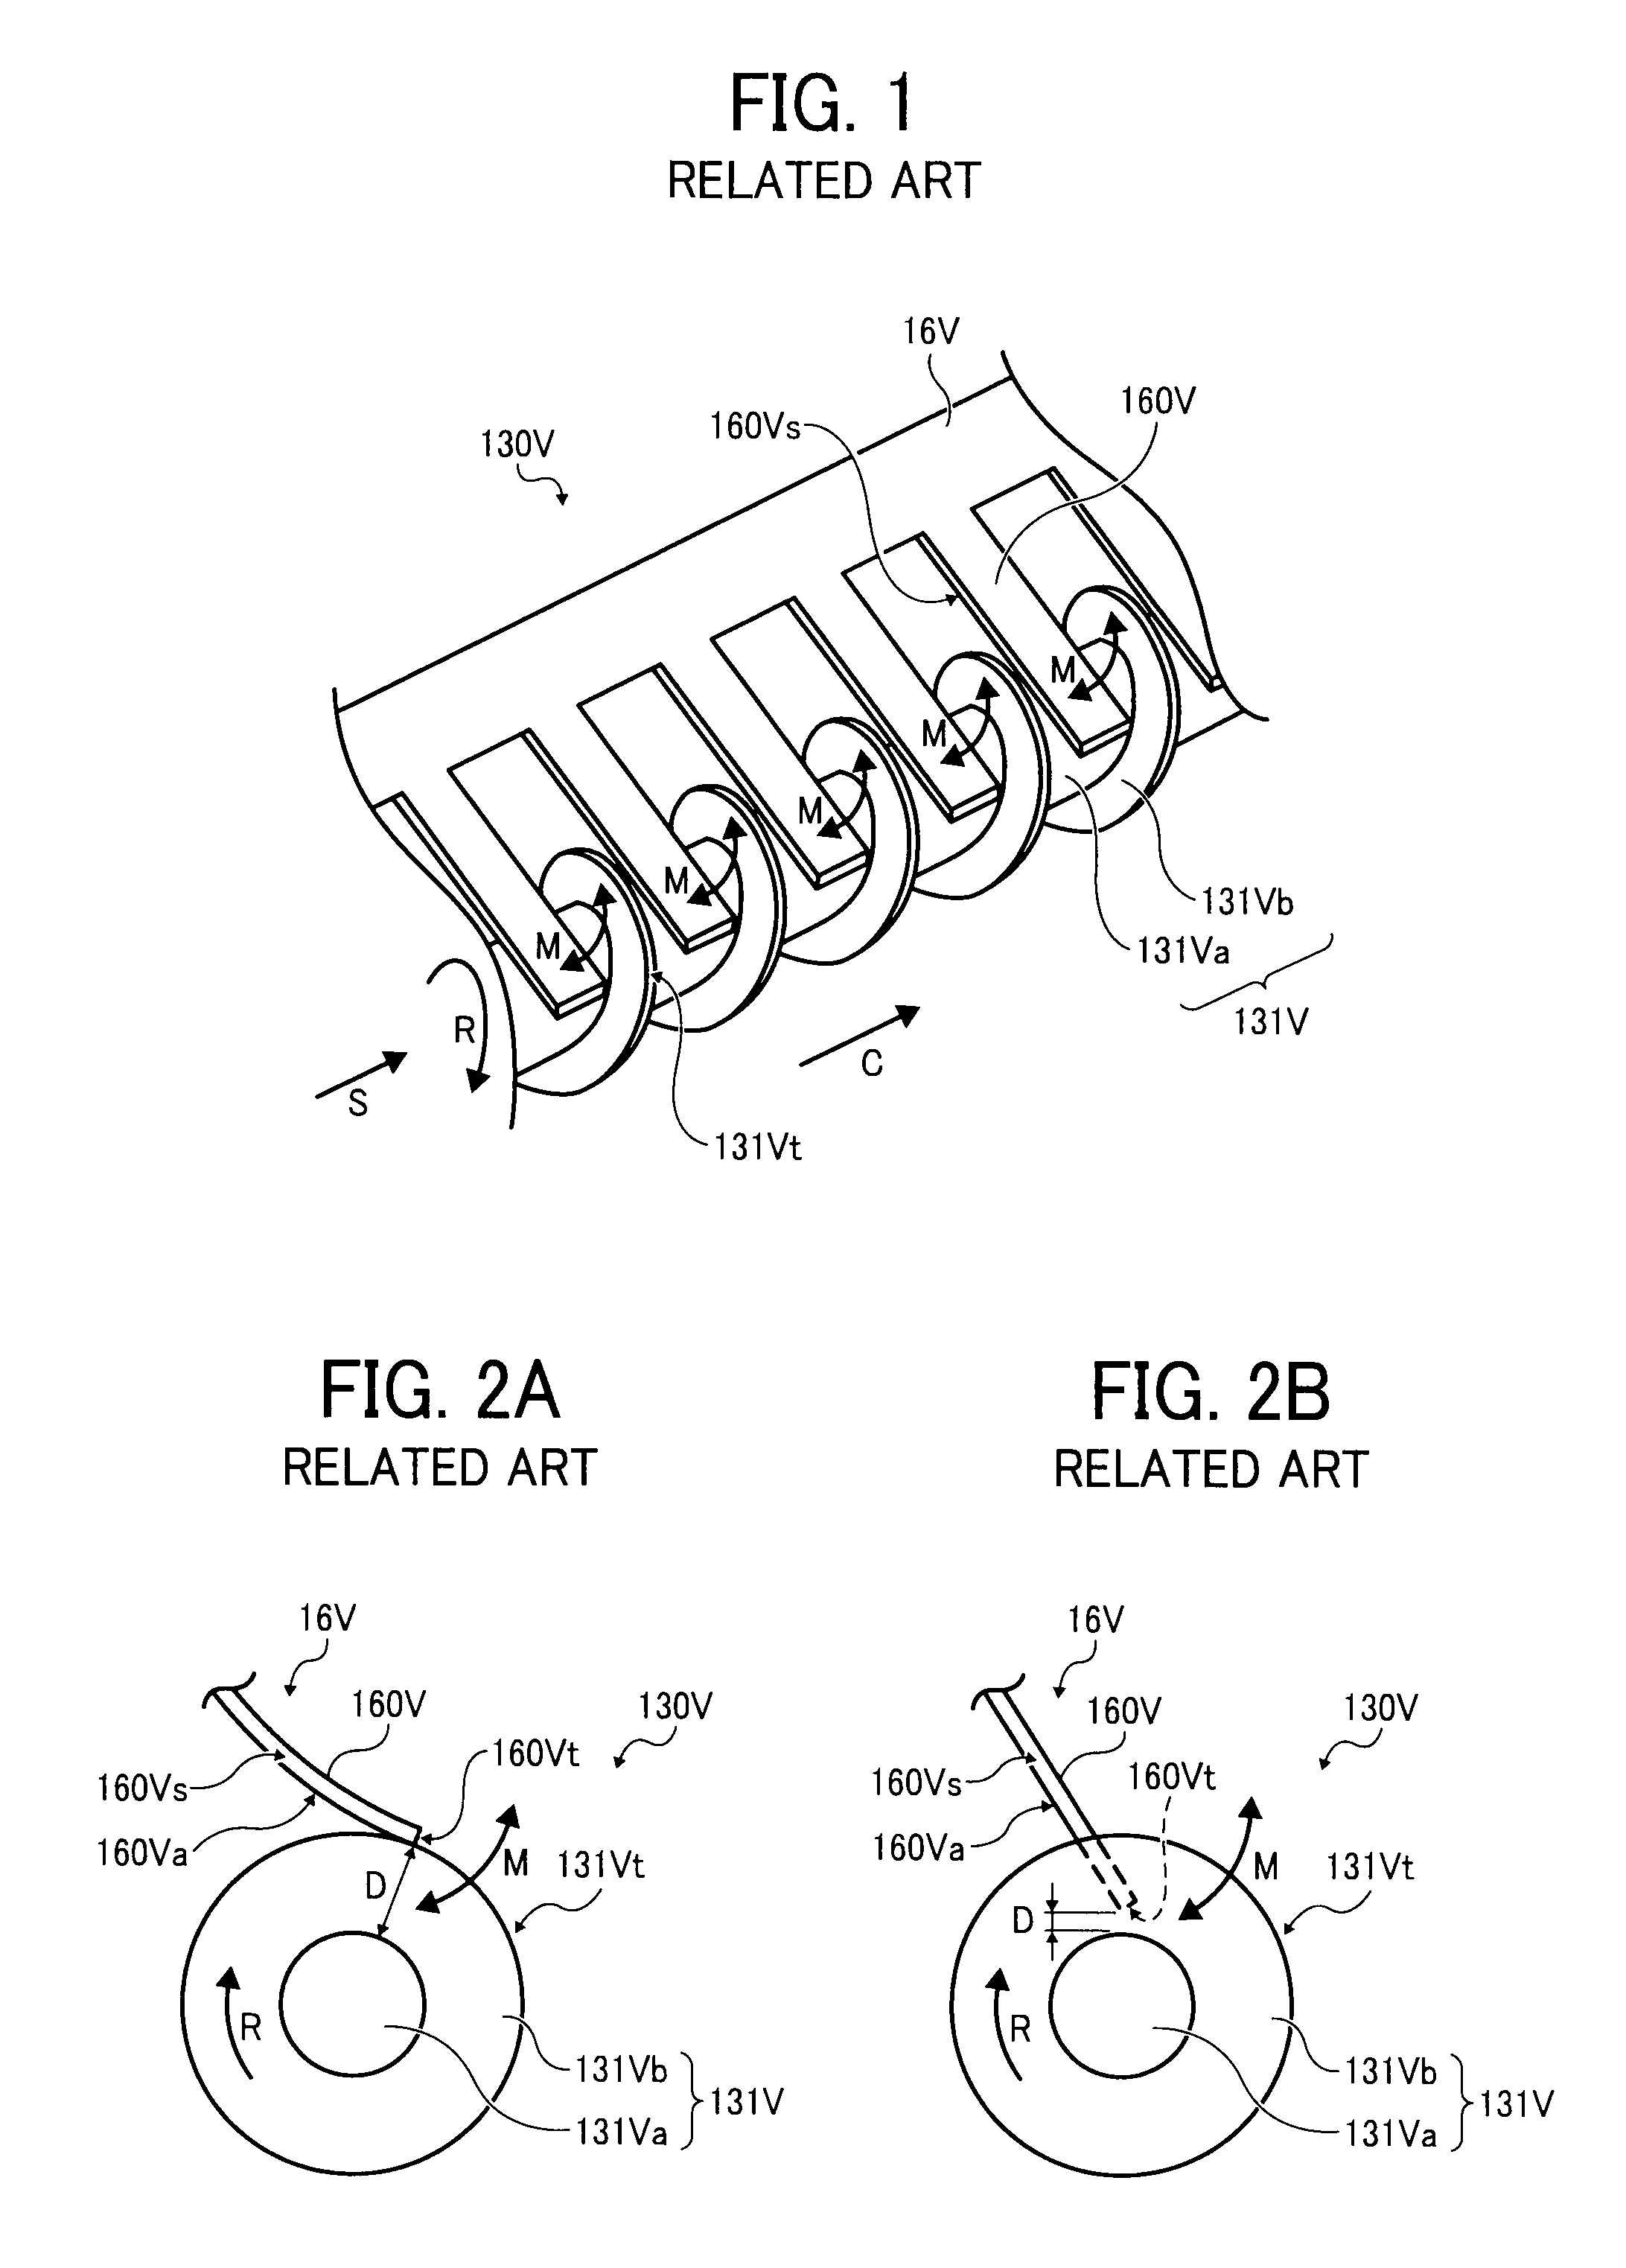 Toner conveyance device and image forming apparatus incorporating same